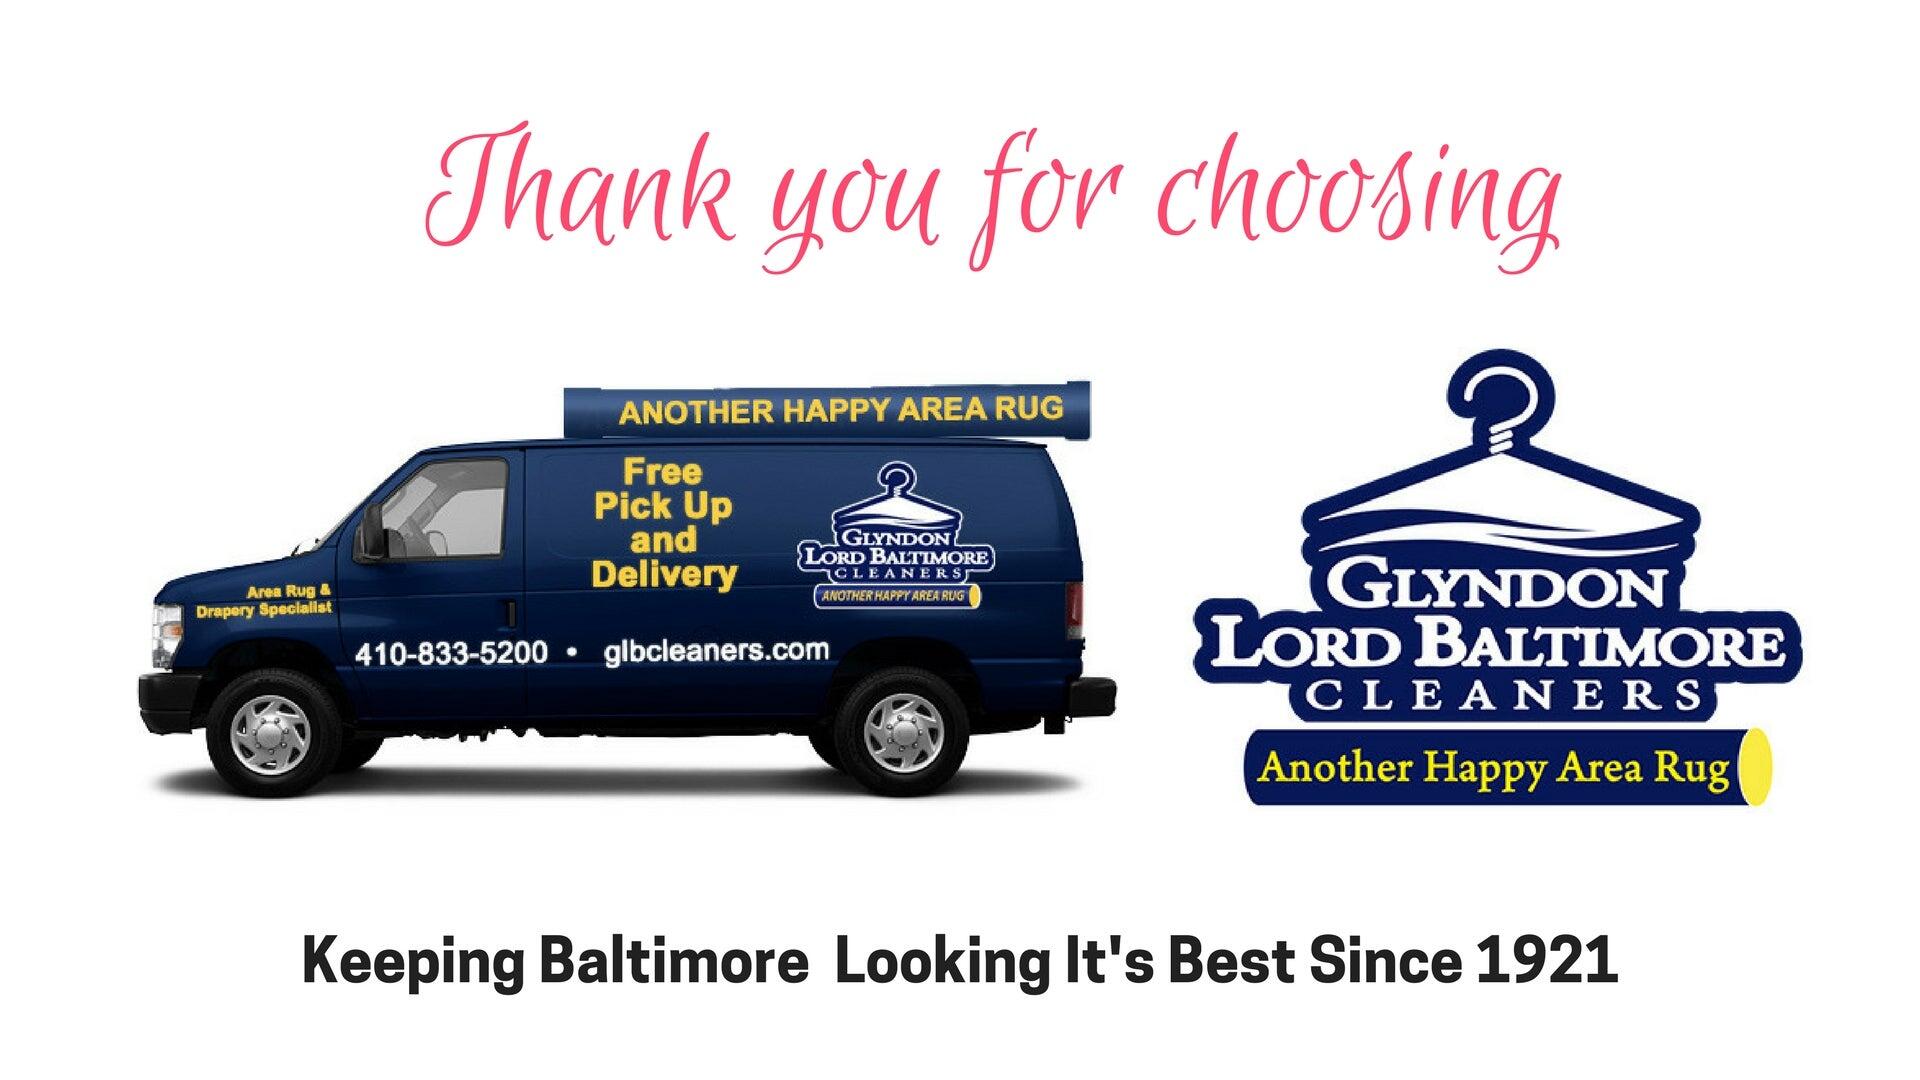 Glyndon Lord Baltimore Cleaners 6 Central Ave, Glyndon Maryland 21071